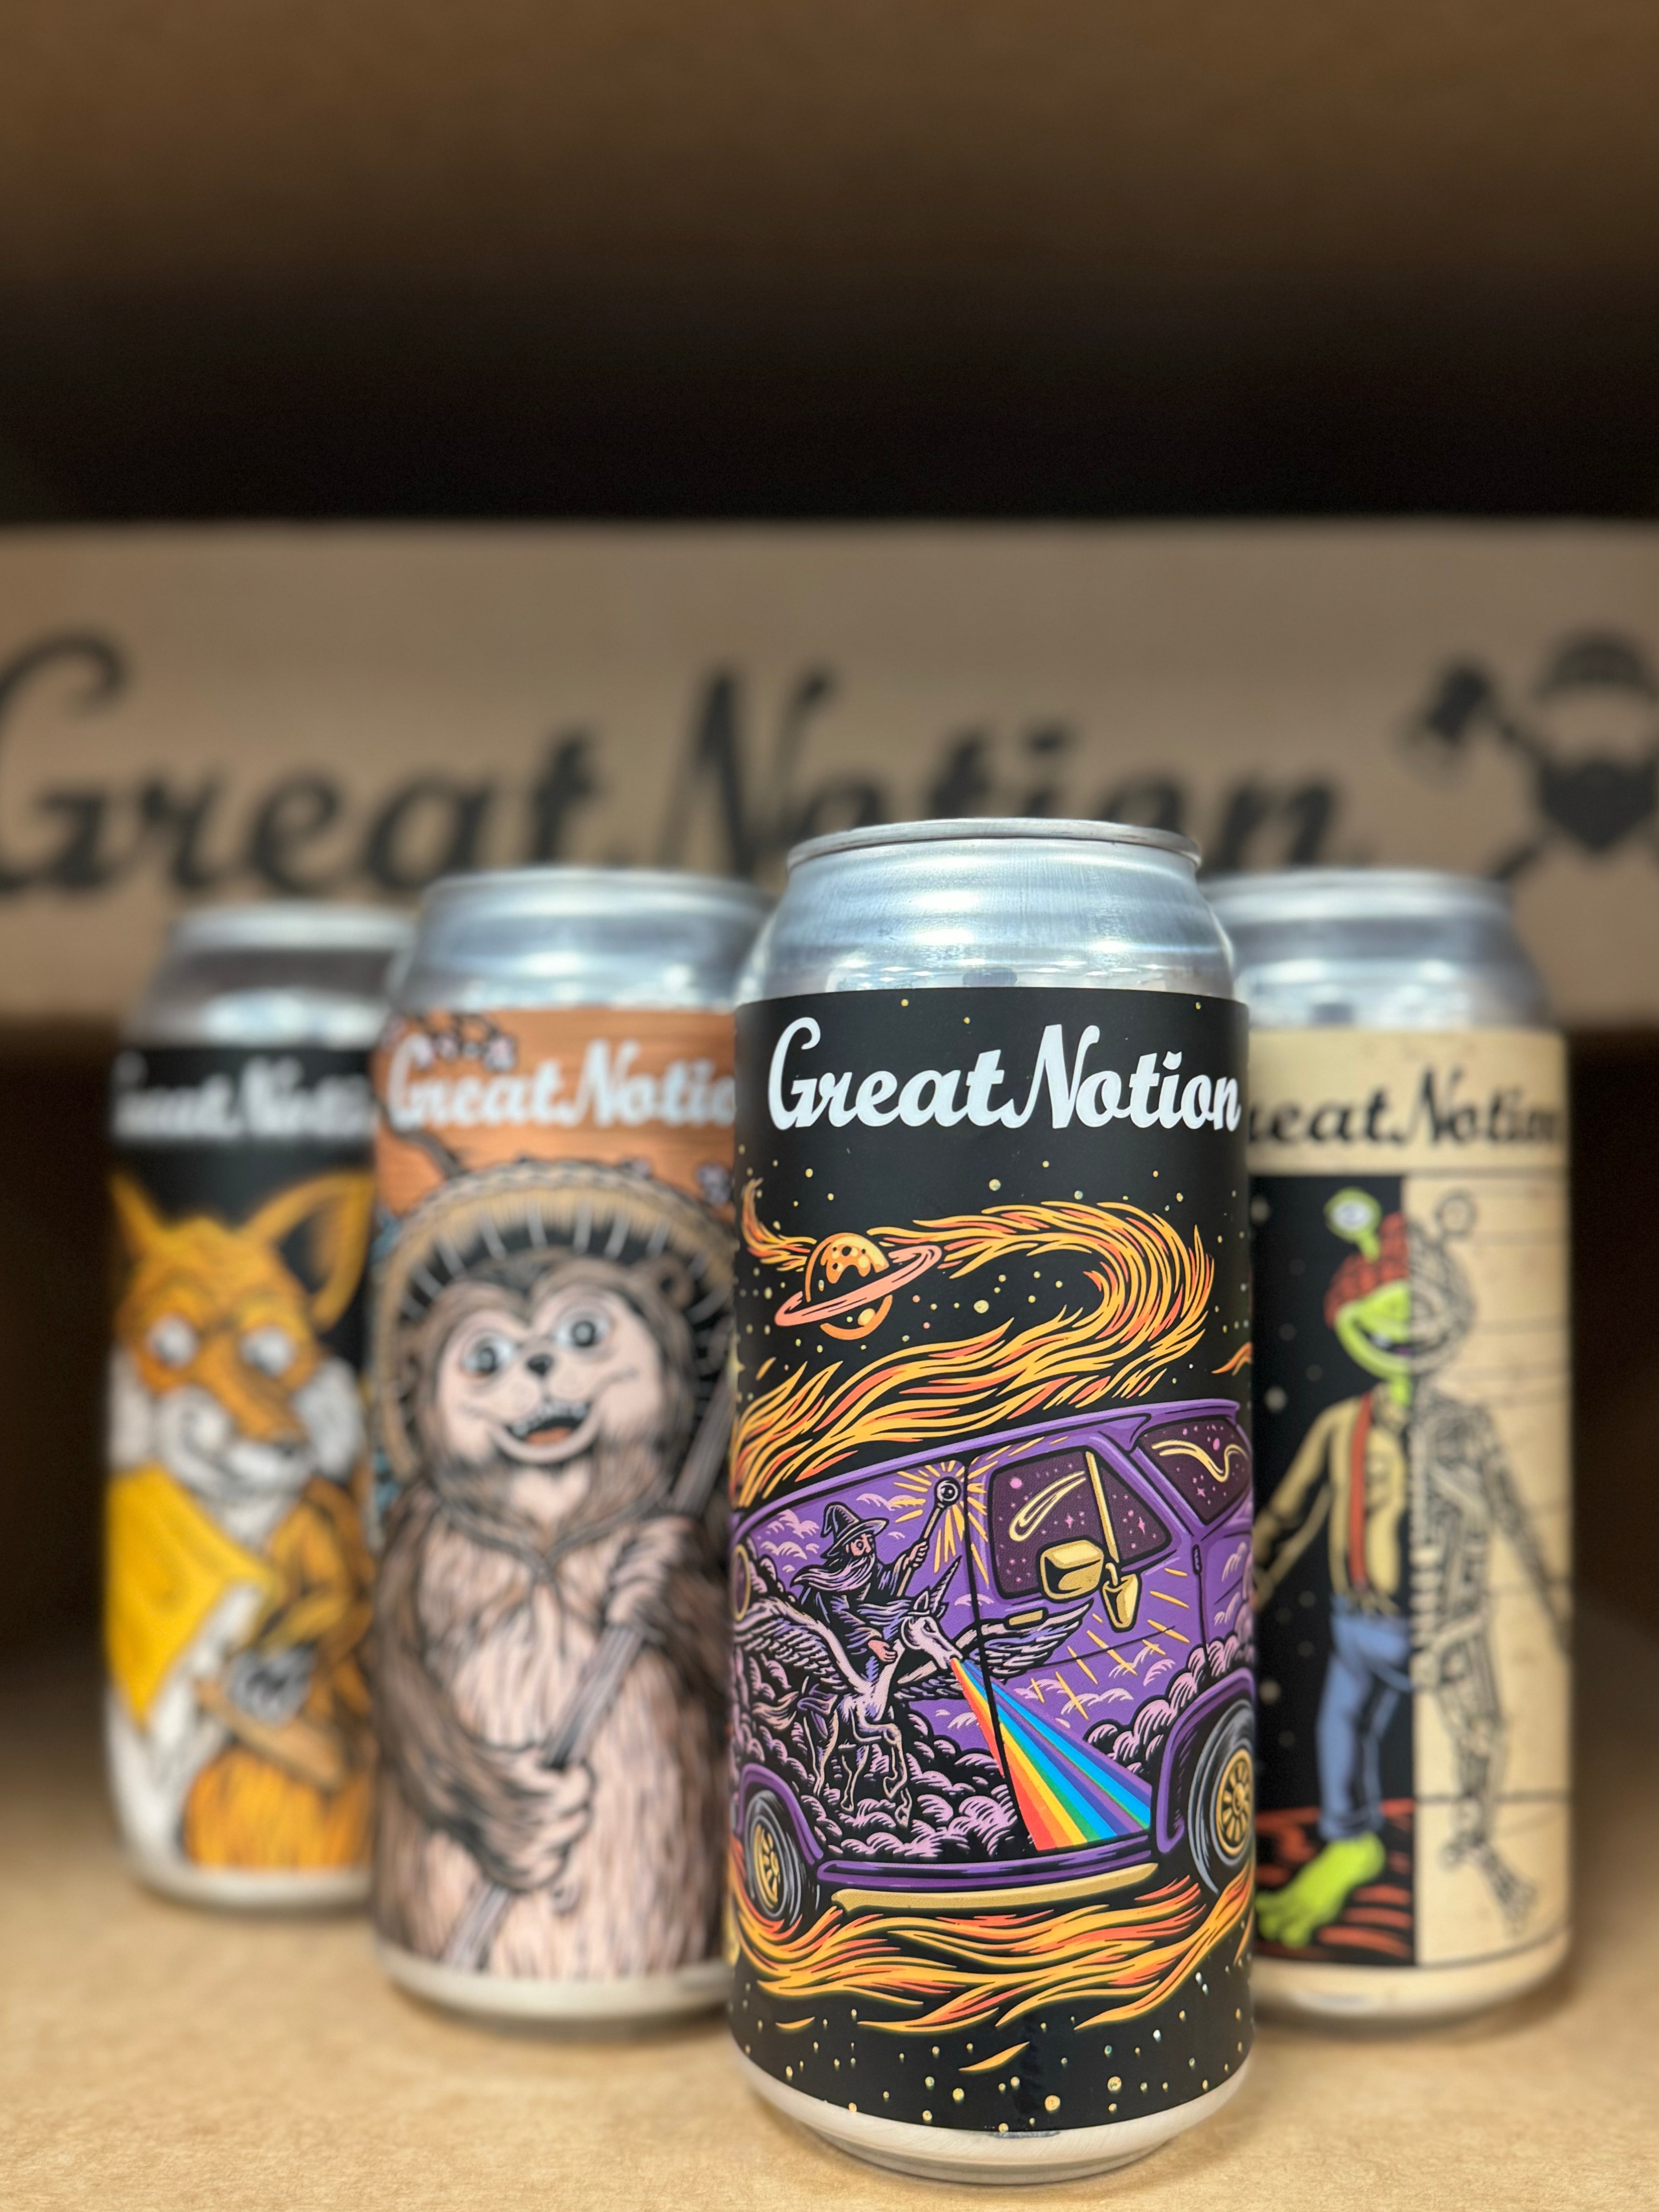 -Great Notion- Great Notion 🚀 Take Off Set 2-Packs & Cases- Only @ Beer Republic - The best online beer store for American & Canadian craft beer - Buy beer online from the USA and Canada - Bier online kopen - Amerikaans bier kopen - Craft beer store - Craft beer kopen - Amerikanisch bier kaufen - Bier online kaufen - Acheter biere online - IPA - Stout - Porter - New England IPA - Hazy IPA - Imperial Stout - Barrel Aged - Barrel Aged Imperial Stout - Brown - Dark beer - Blond - Blonde - Pilsner - Lager - Whe